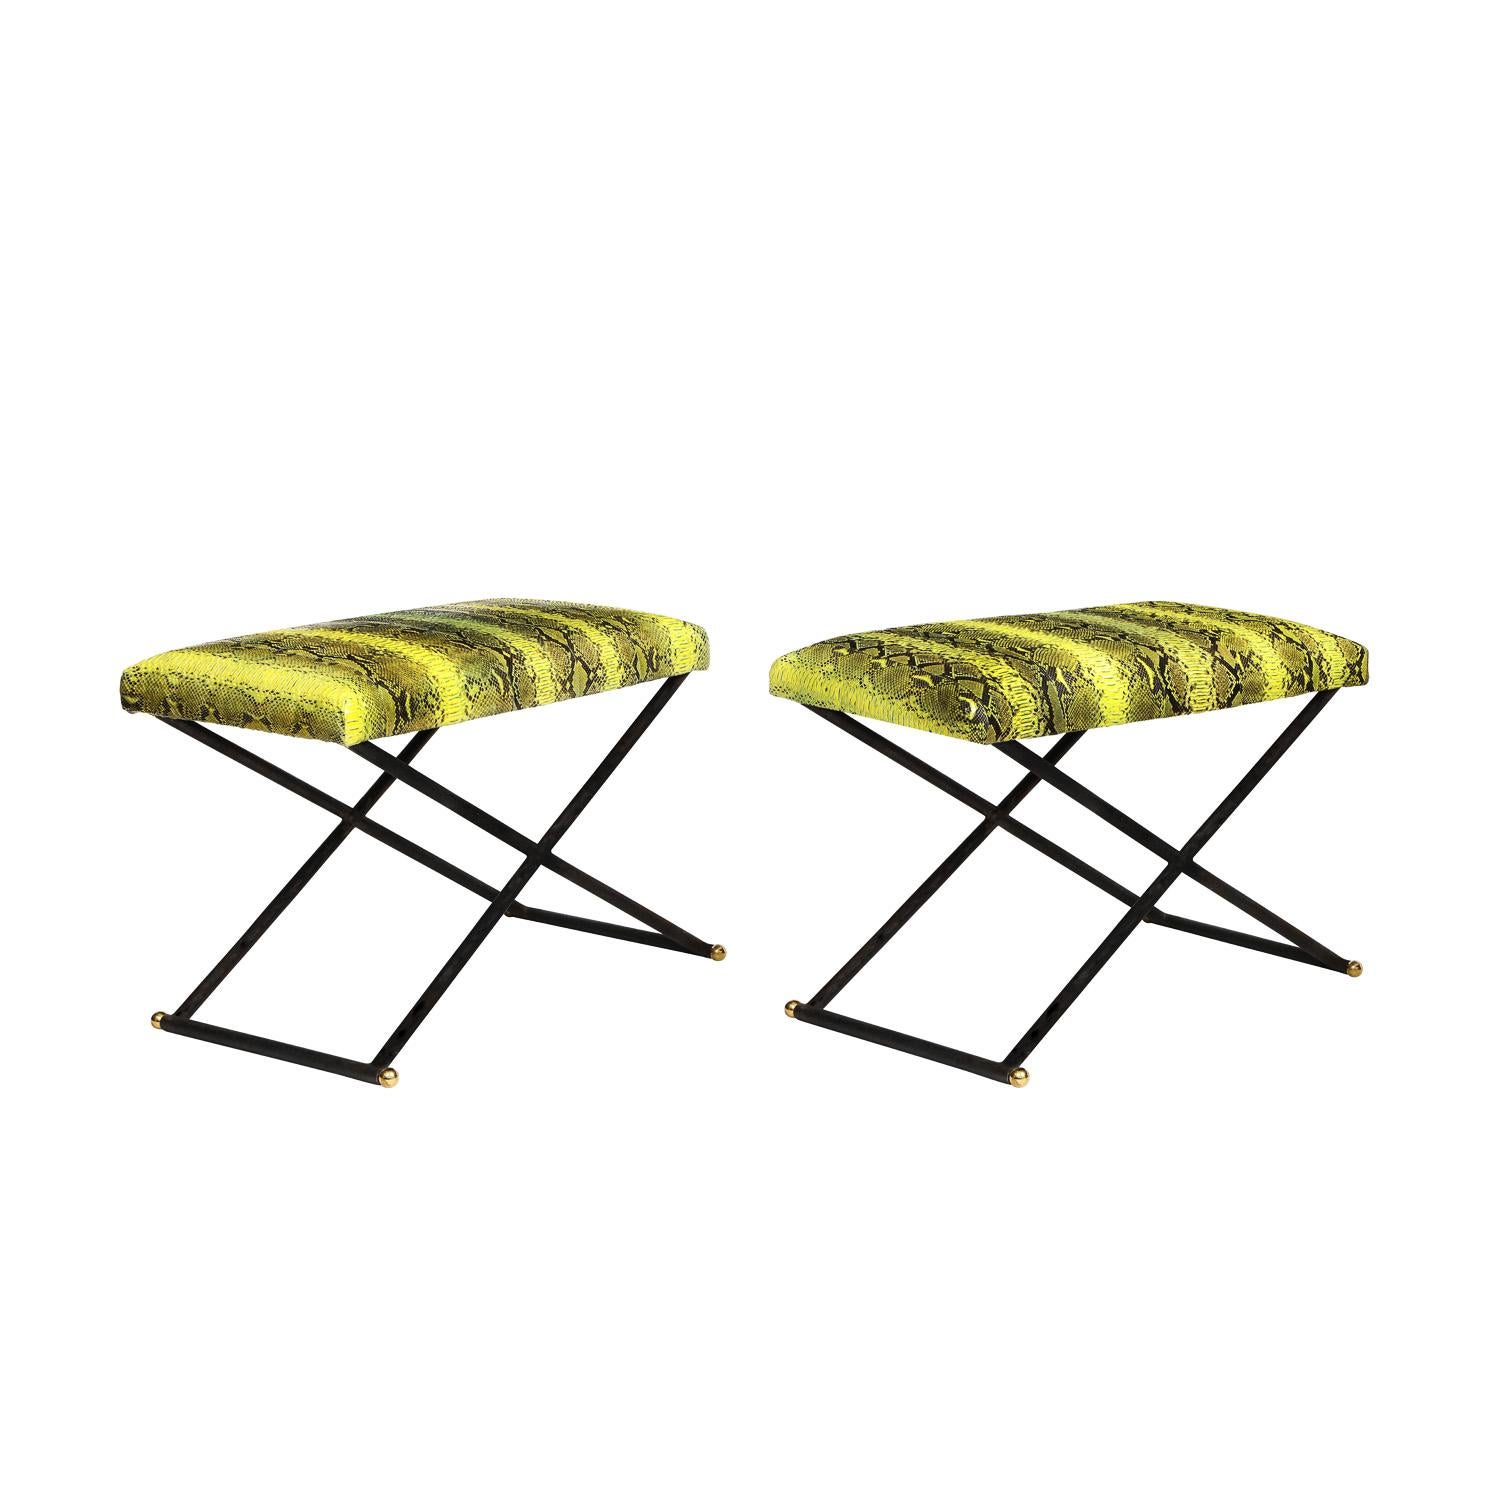 Pair of rare benches, X design in burnished steel with brass ball accents and seats upholstered in yellow and black python, by Karl Springer, American 1980's. The python seats are in excellent condition. The steel has been cleaned and professionally